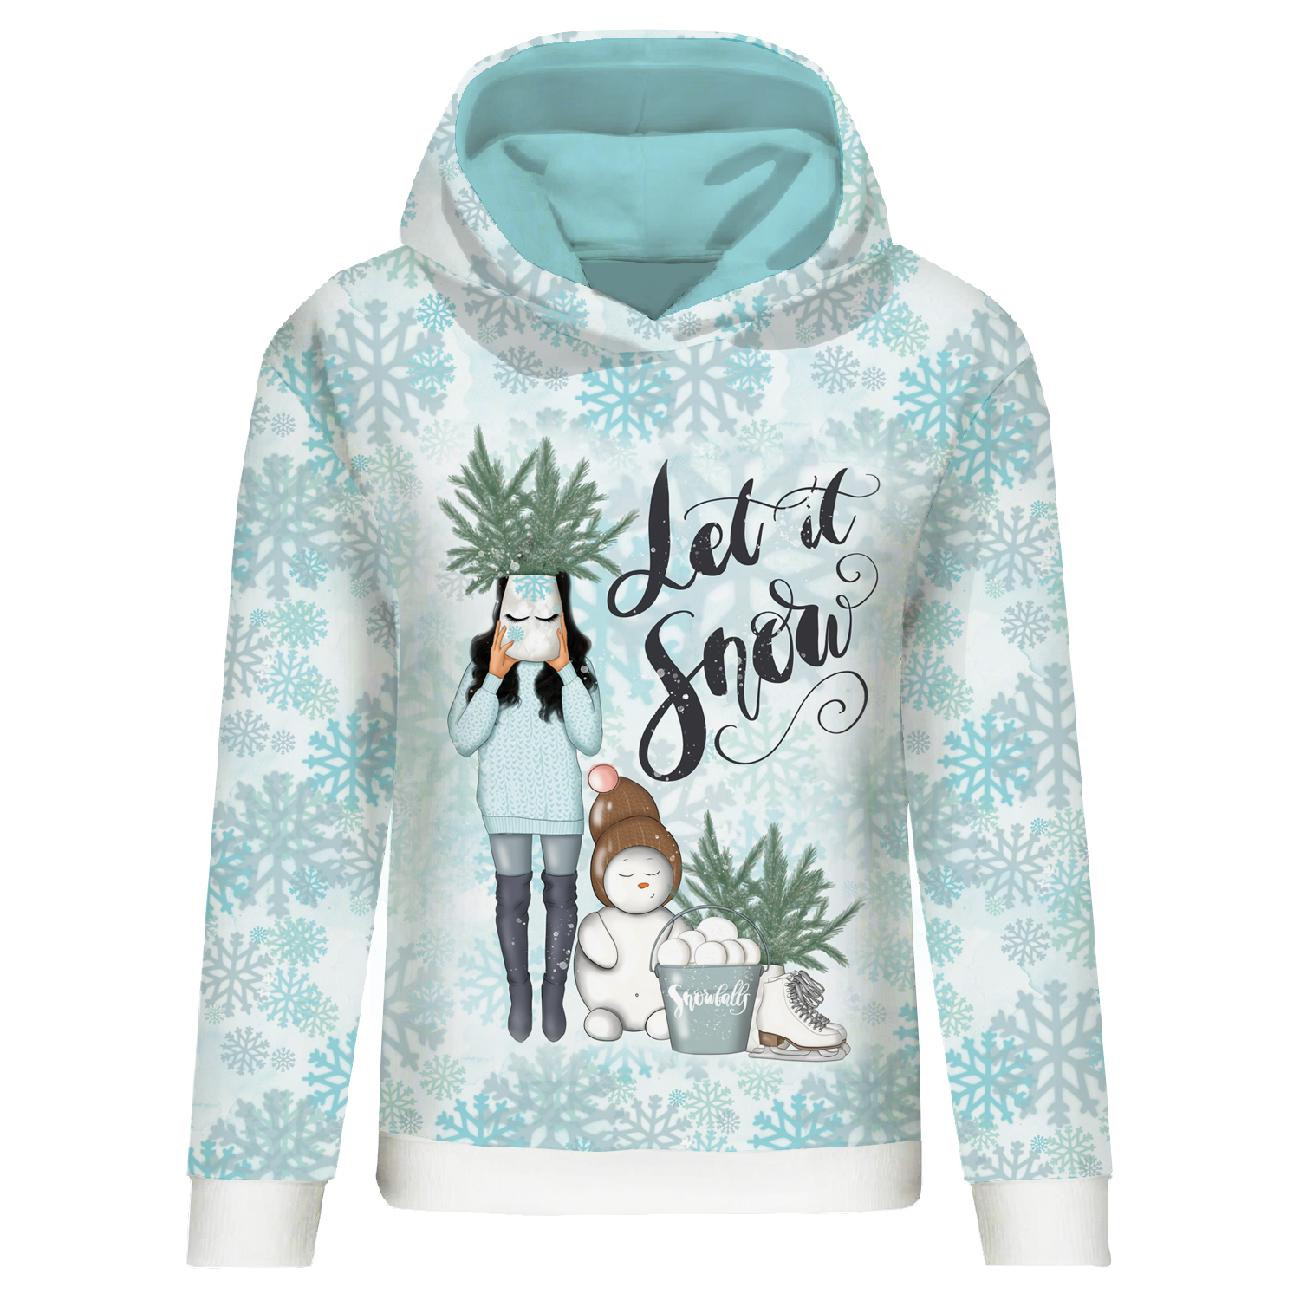 CLASSIC WOMEN’S HOODIE (POLA) - LET IT SNOW PAT. 2 (WINTER IN THE CITY) - looped knit fabric 